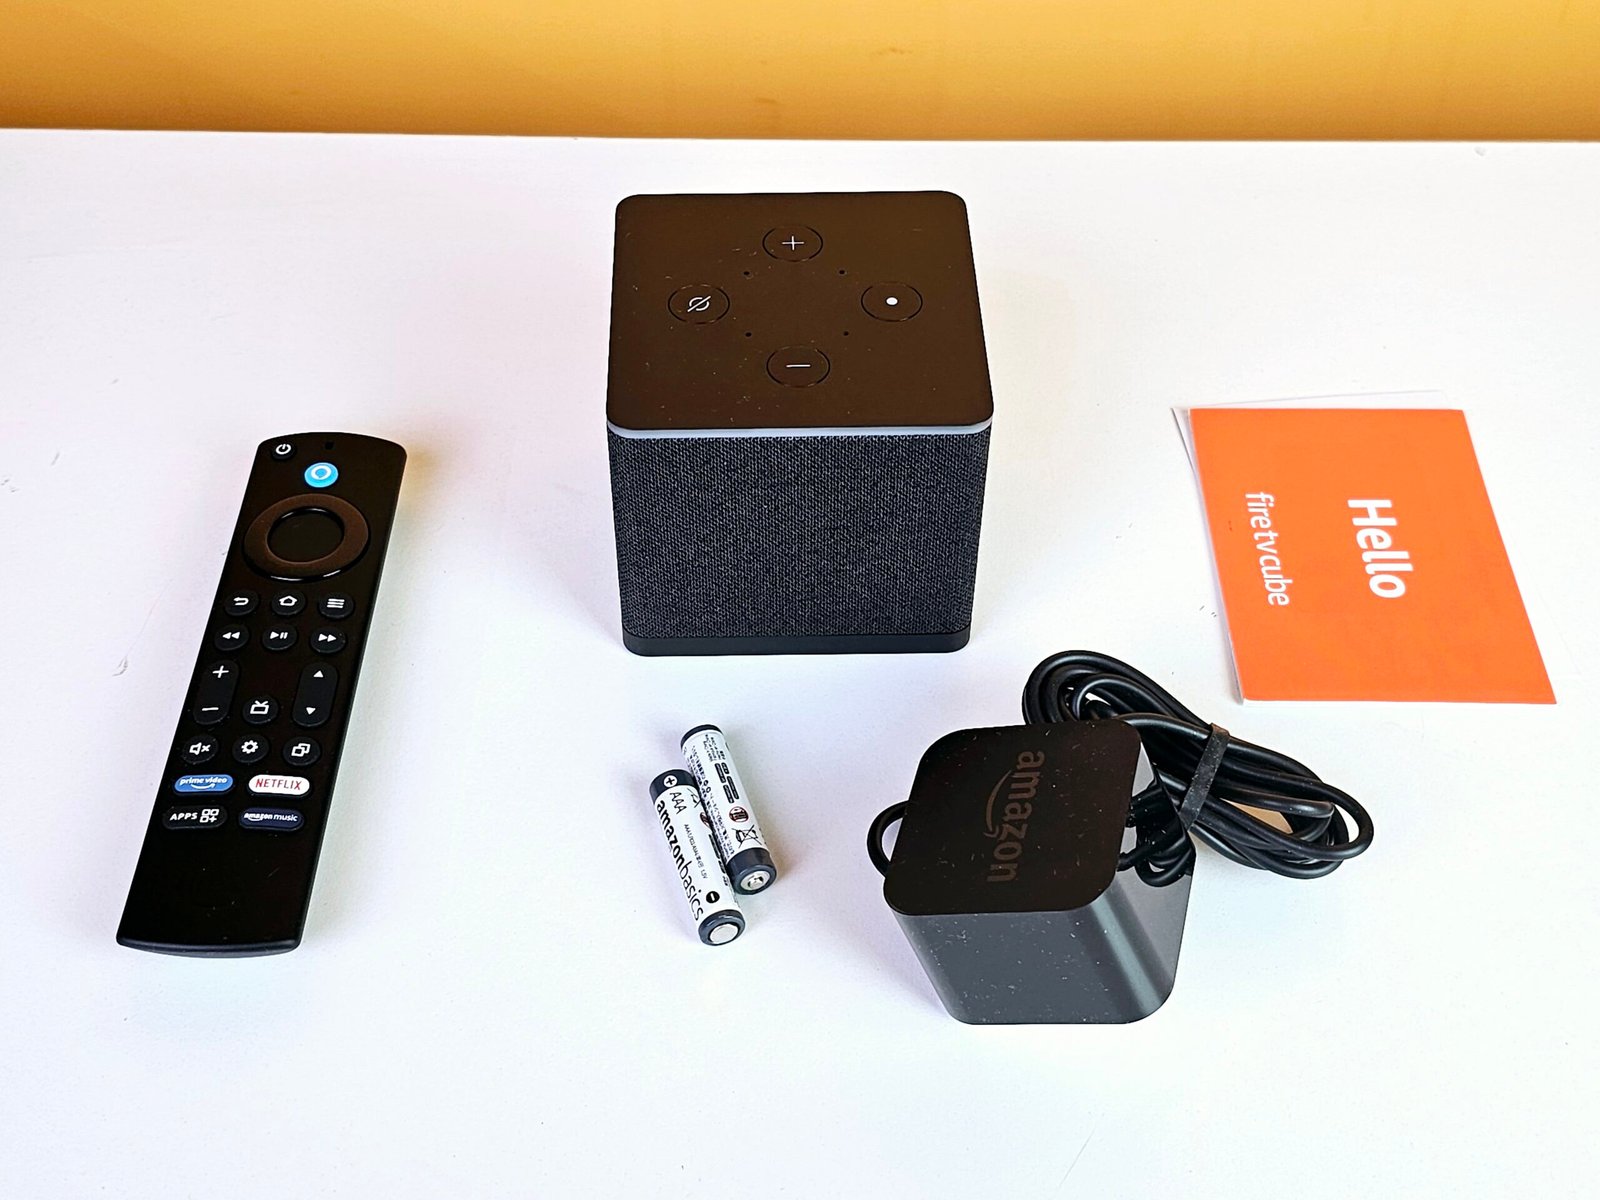 Fire TV Cube (3rd Gen) review - Which?